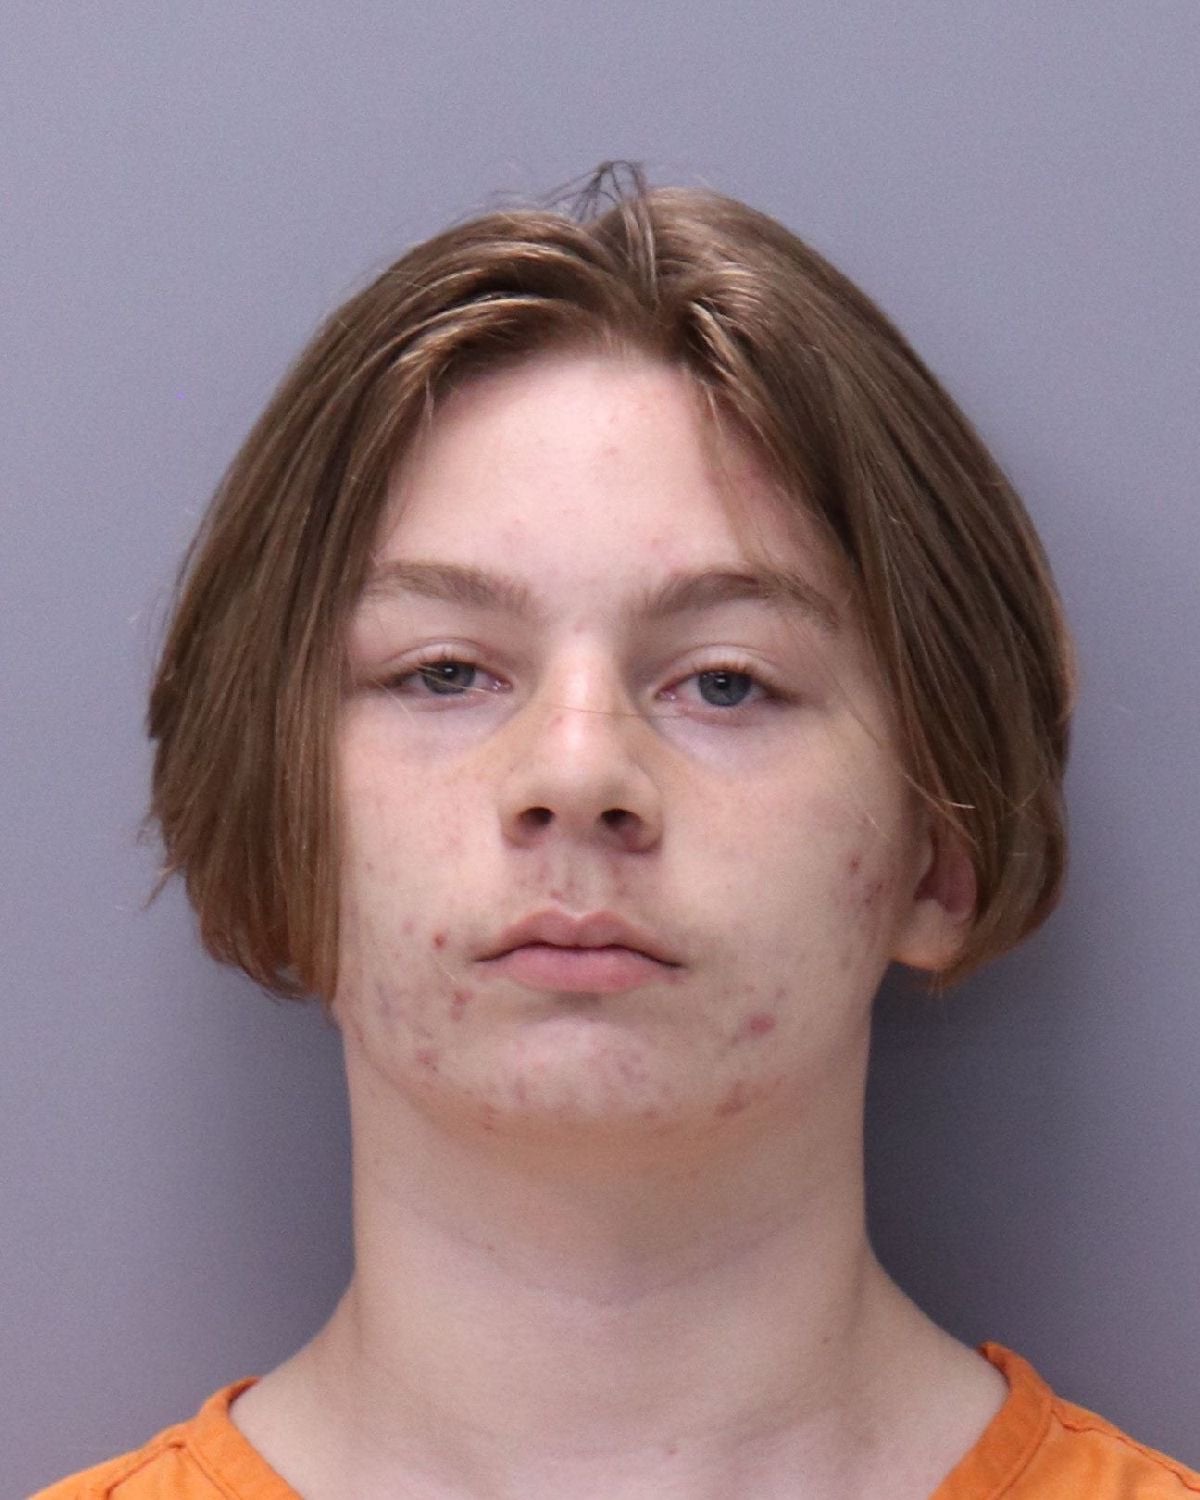 Police have arrested Aiden Fucci, 14, who has been charged with the murder of 13-year-old Tristyn Bailey.